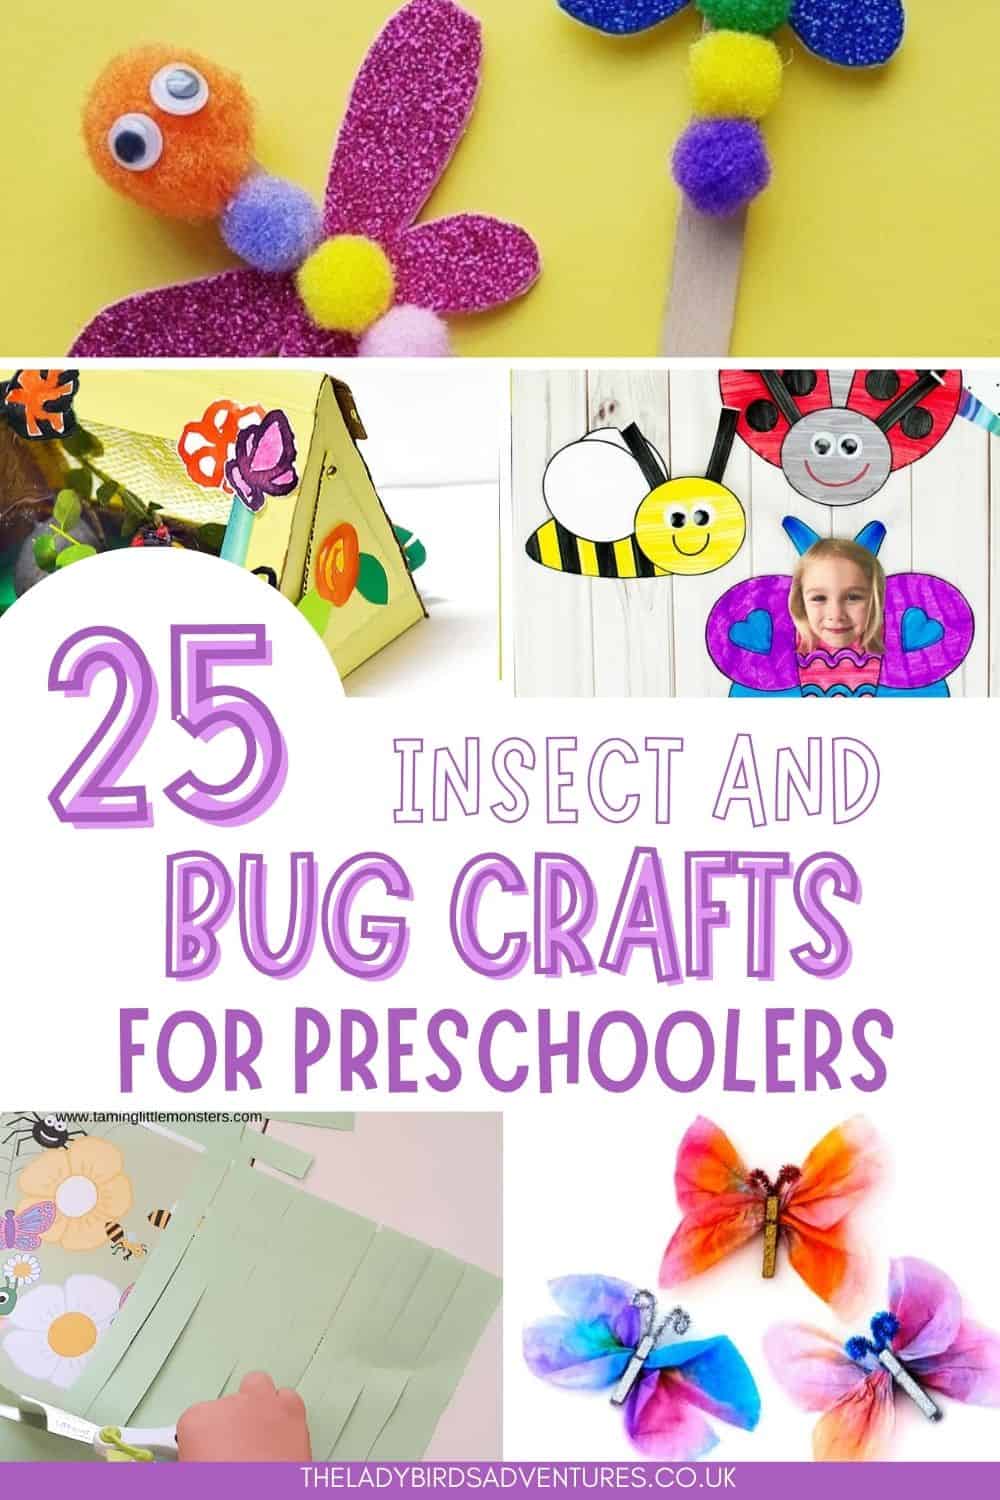 5 photos of insect crafts and text that reads 25 insect and bug crafts for preschoolers